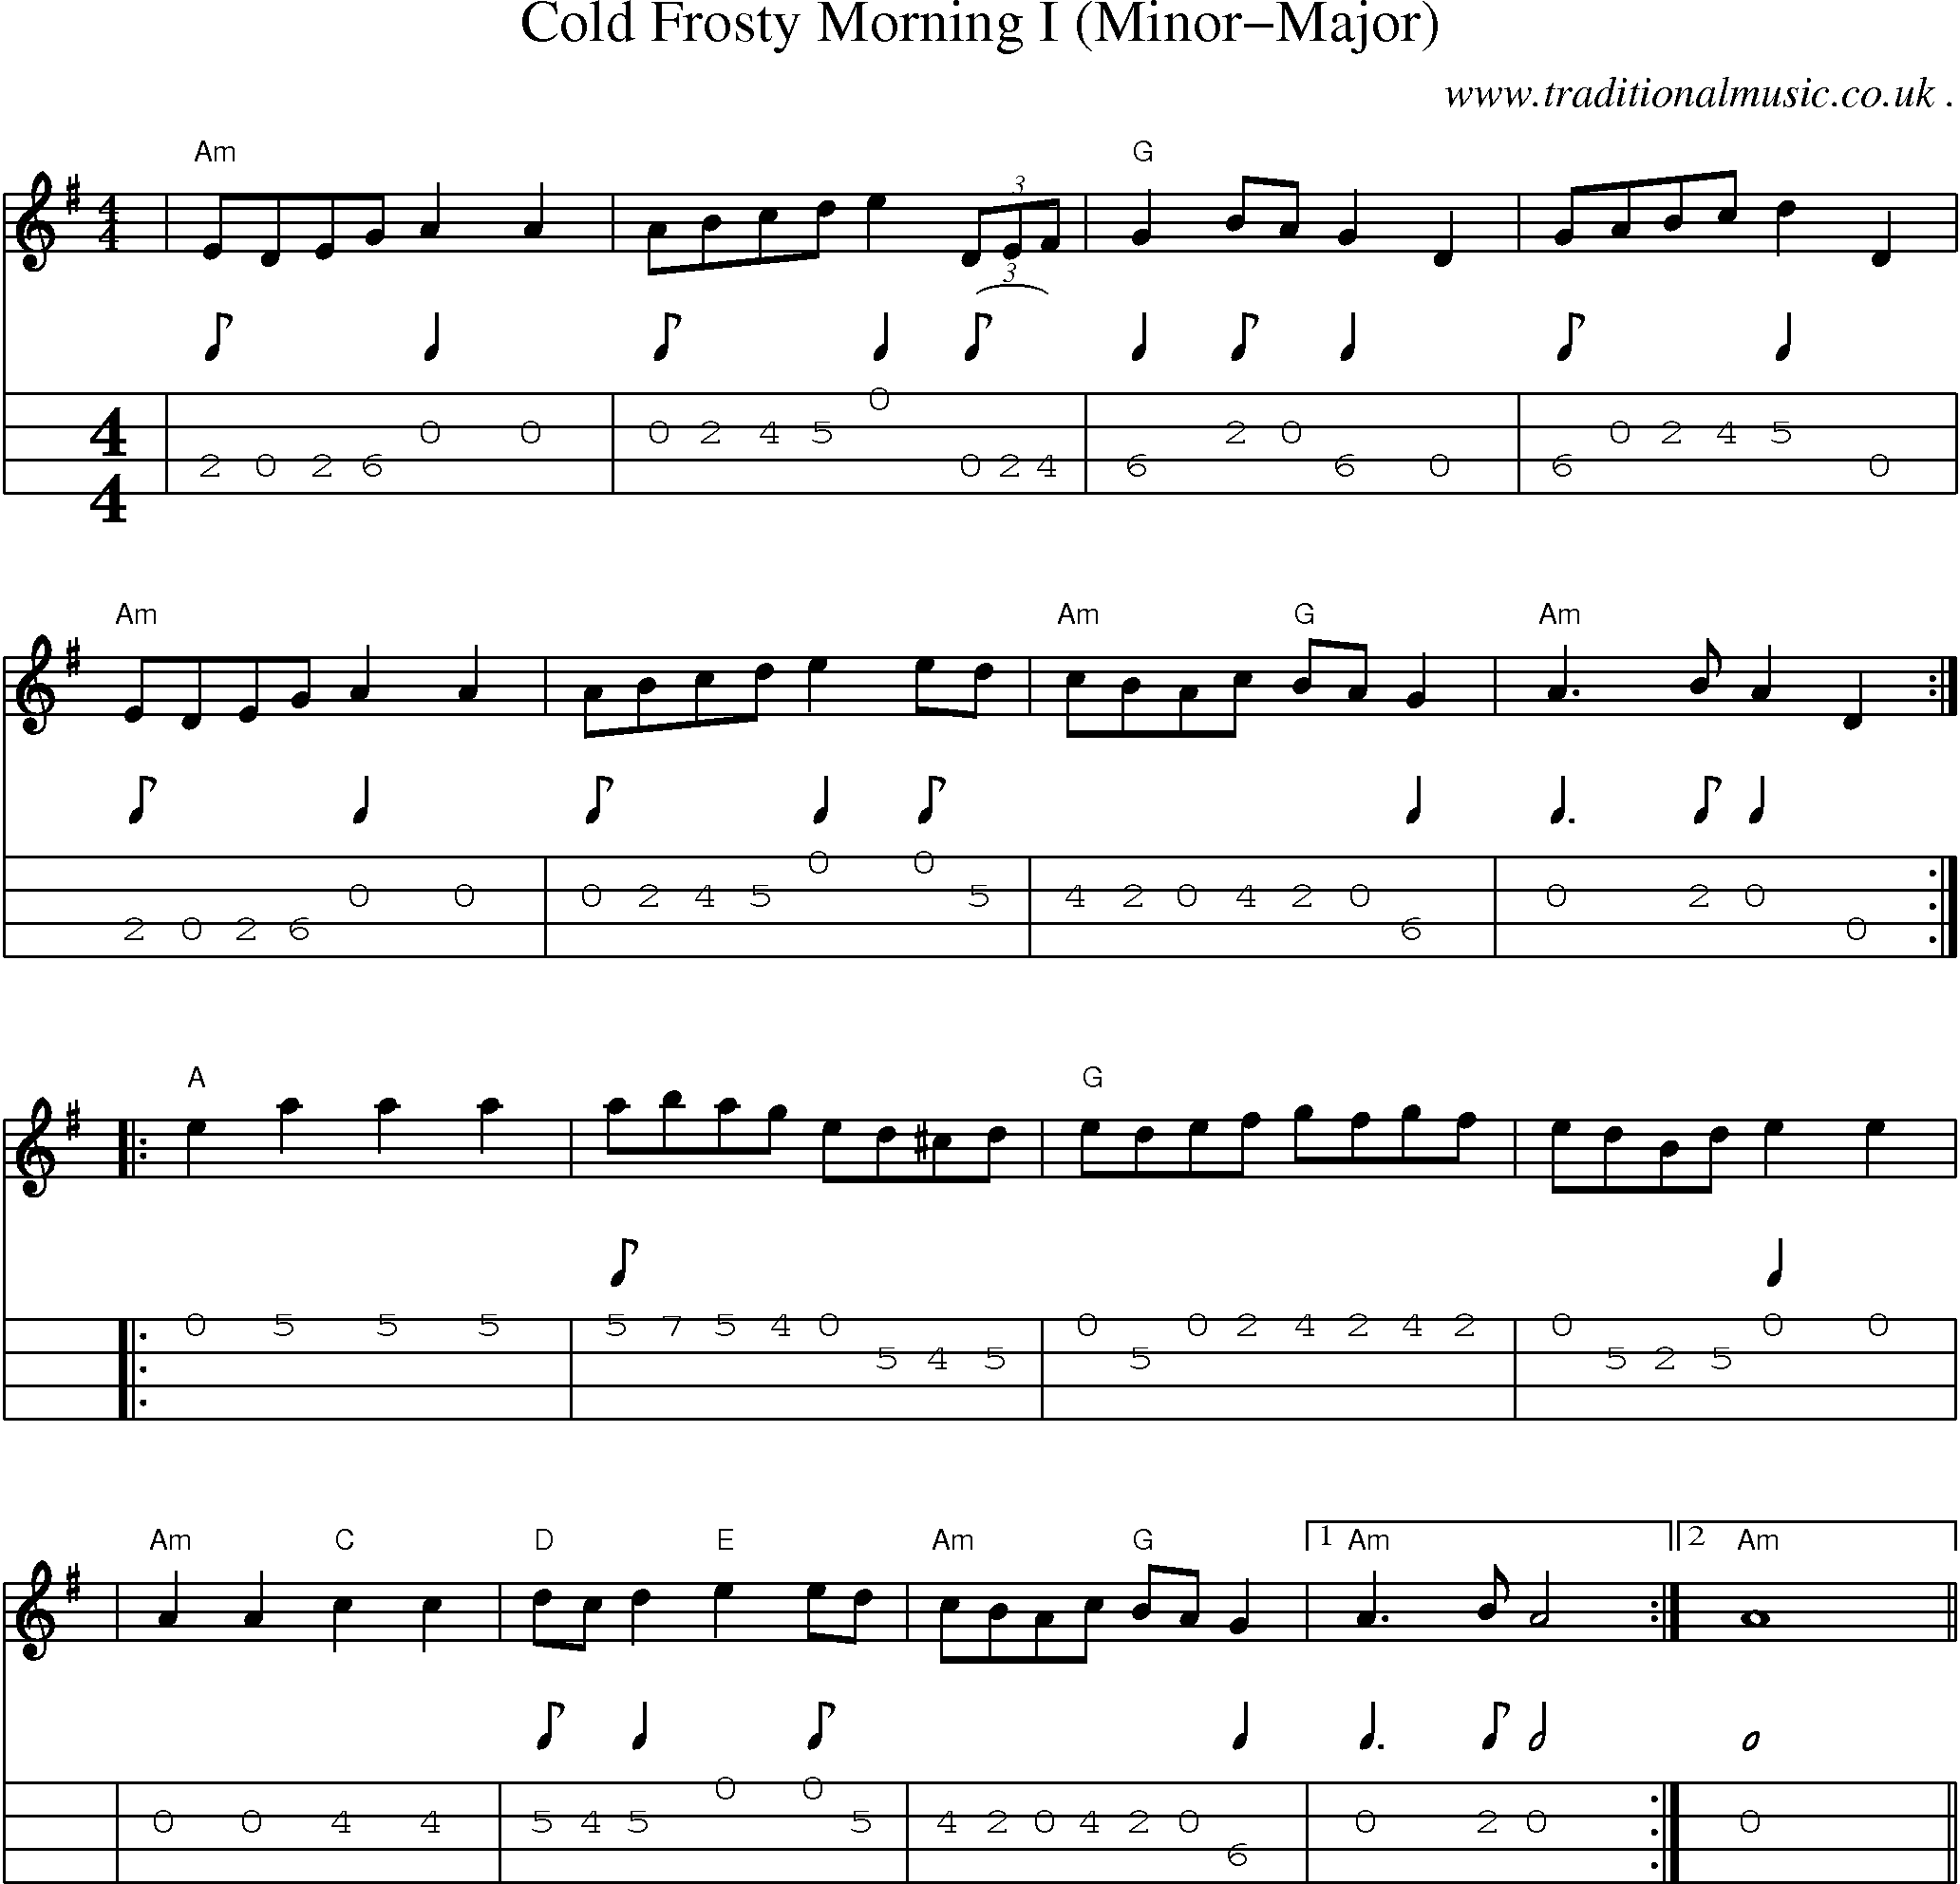 Music Score and Guitar Tabs for Cold Frosty Morning I (minor-major)